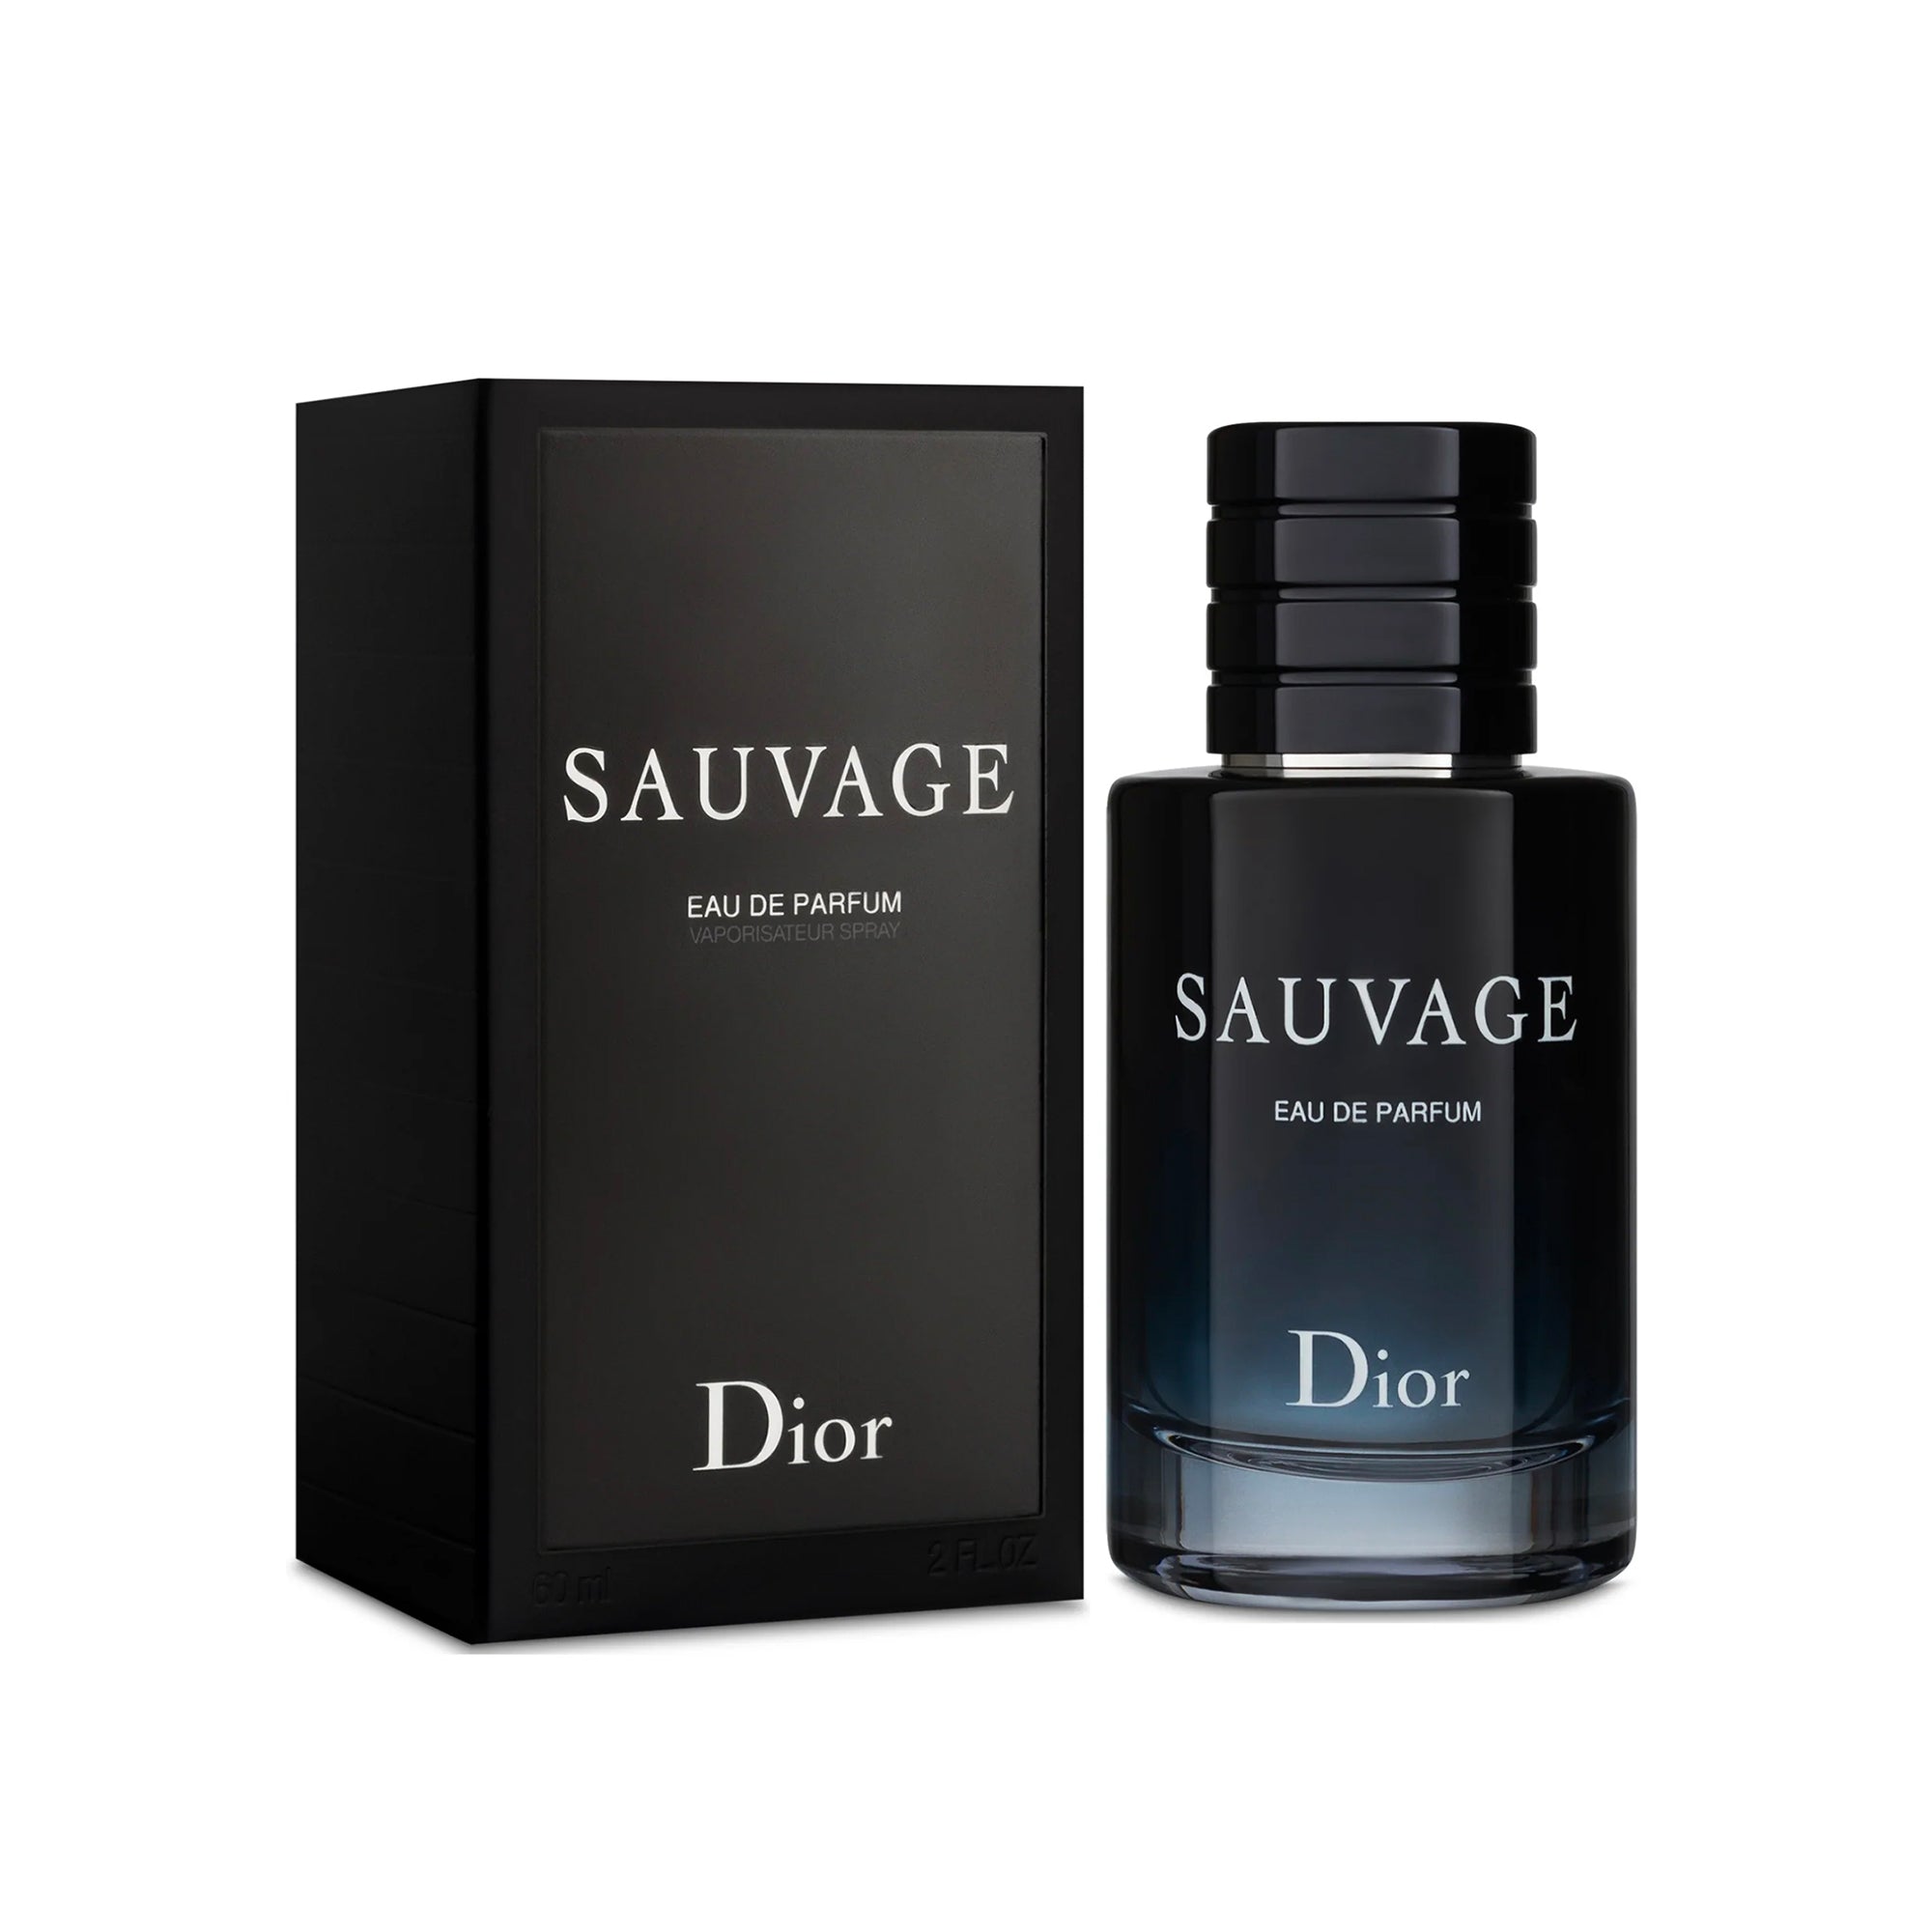 Dior Sauvage has become the best-selling fragrance in the world